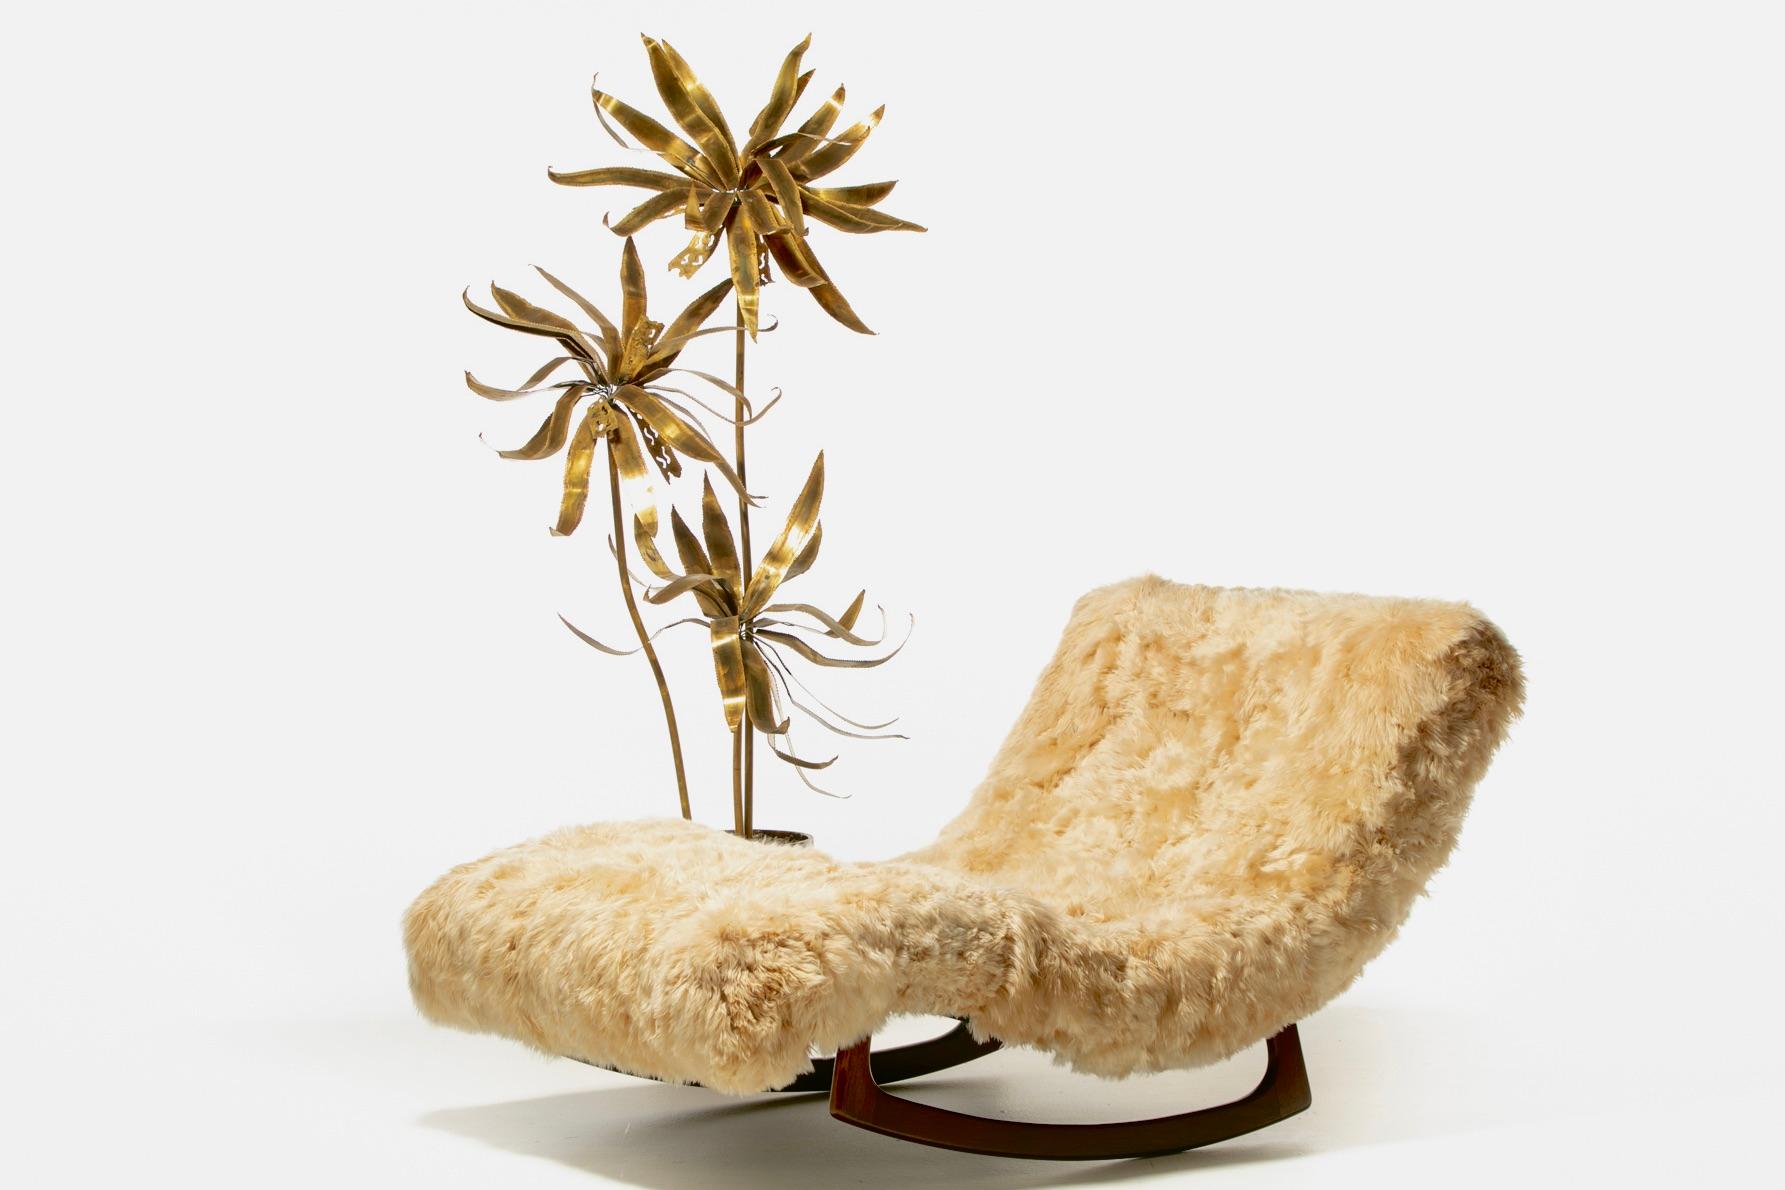 This Adrian Pearsall chaise rocker is a triple crown winner with iconic Mid-Century Modern ergonomic Adrian Pearsall design, cozy comfort dressed in new hand sewn baby soft Champagne Alpaca upholstery, and it's a great acquisition in great